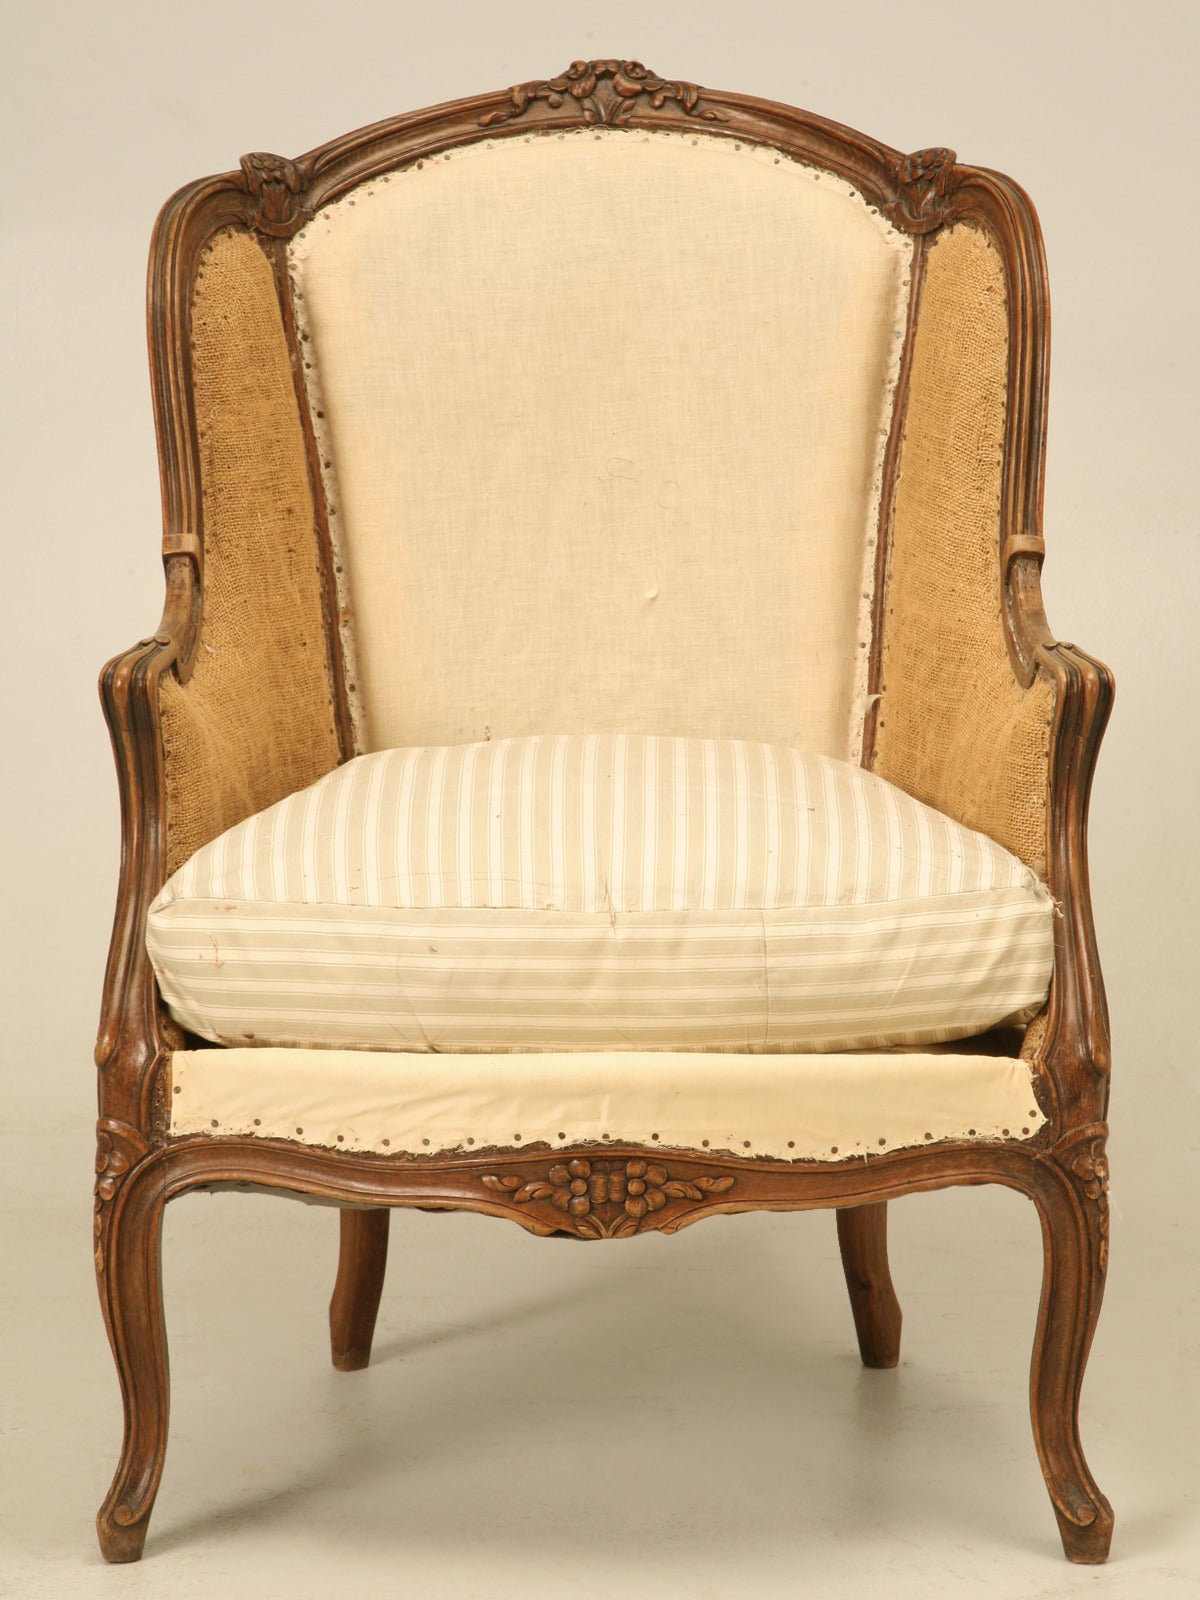 Antique French Hand-Carved Walnut Louis XV Style Chair, Down Cushion circa 1880s For Sale 1